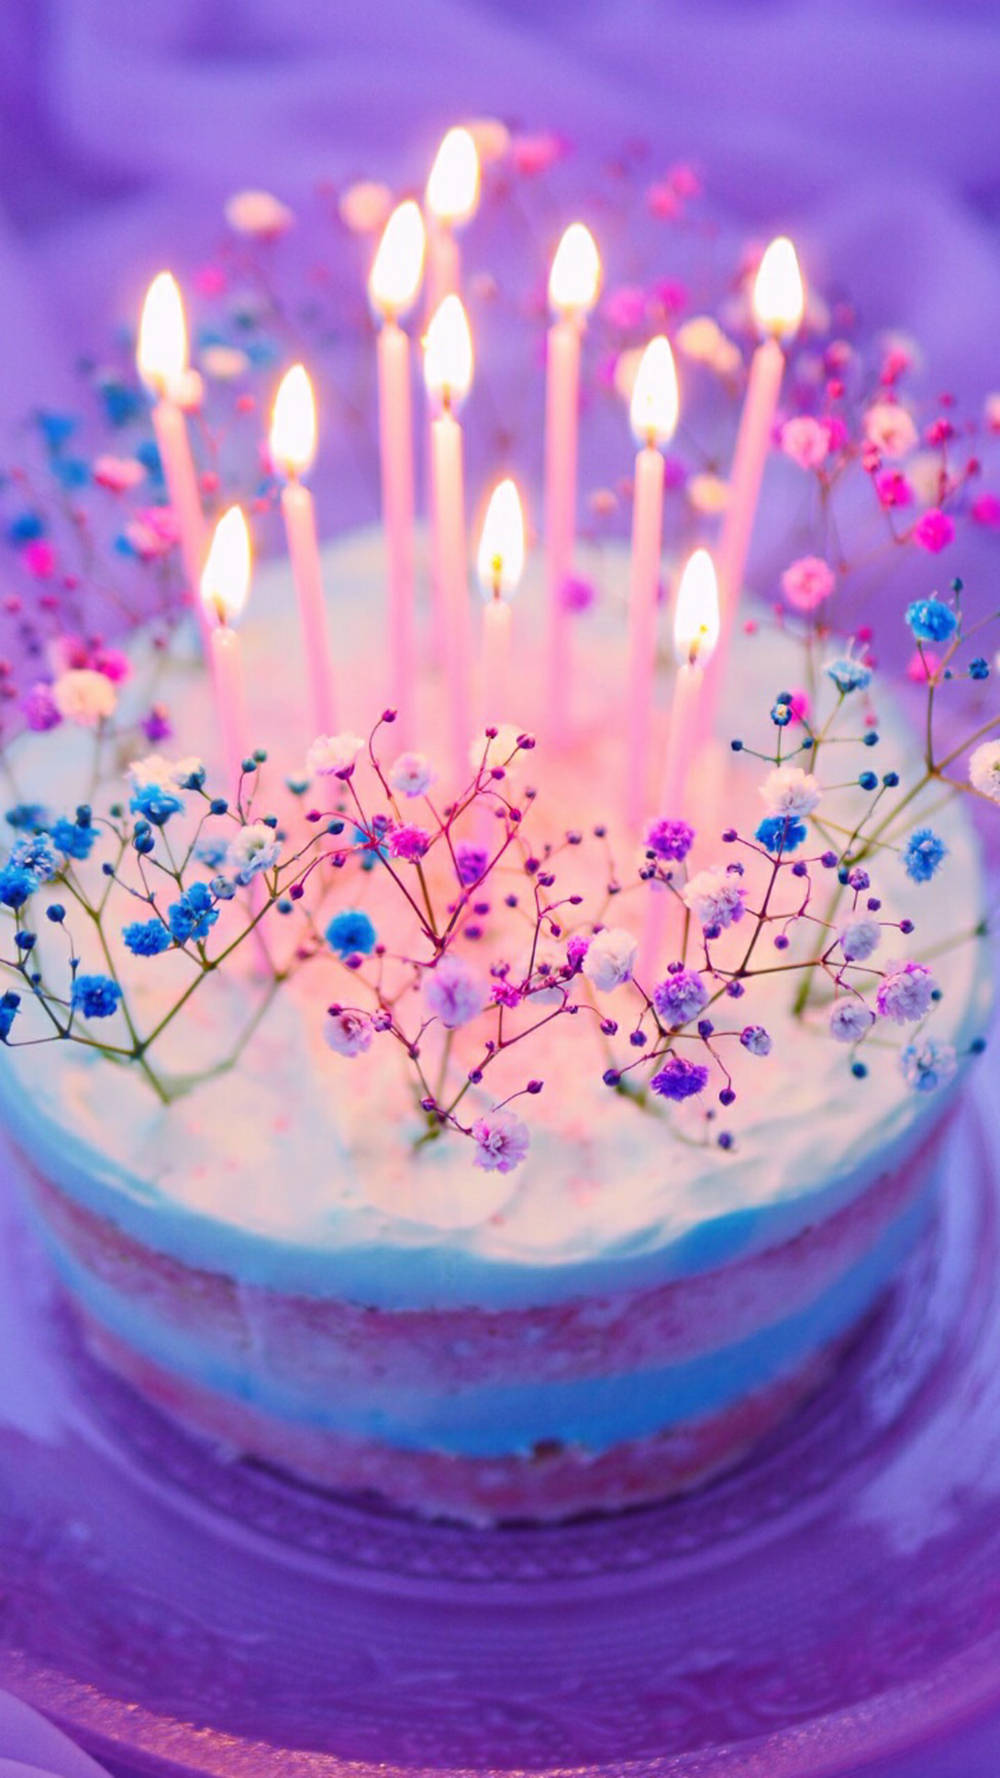 Aesthetic Happy Birthday Cake And Candles Wallpaper